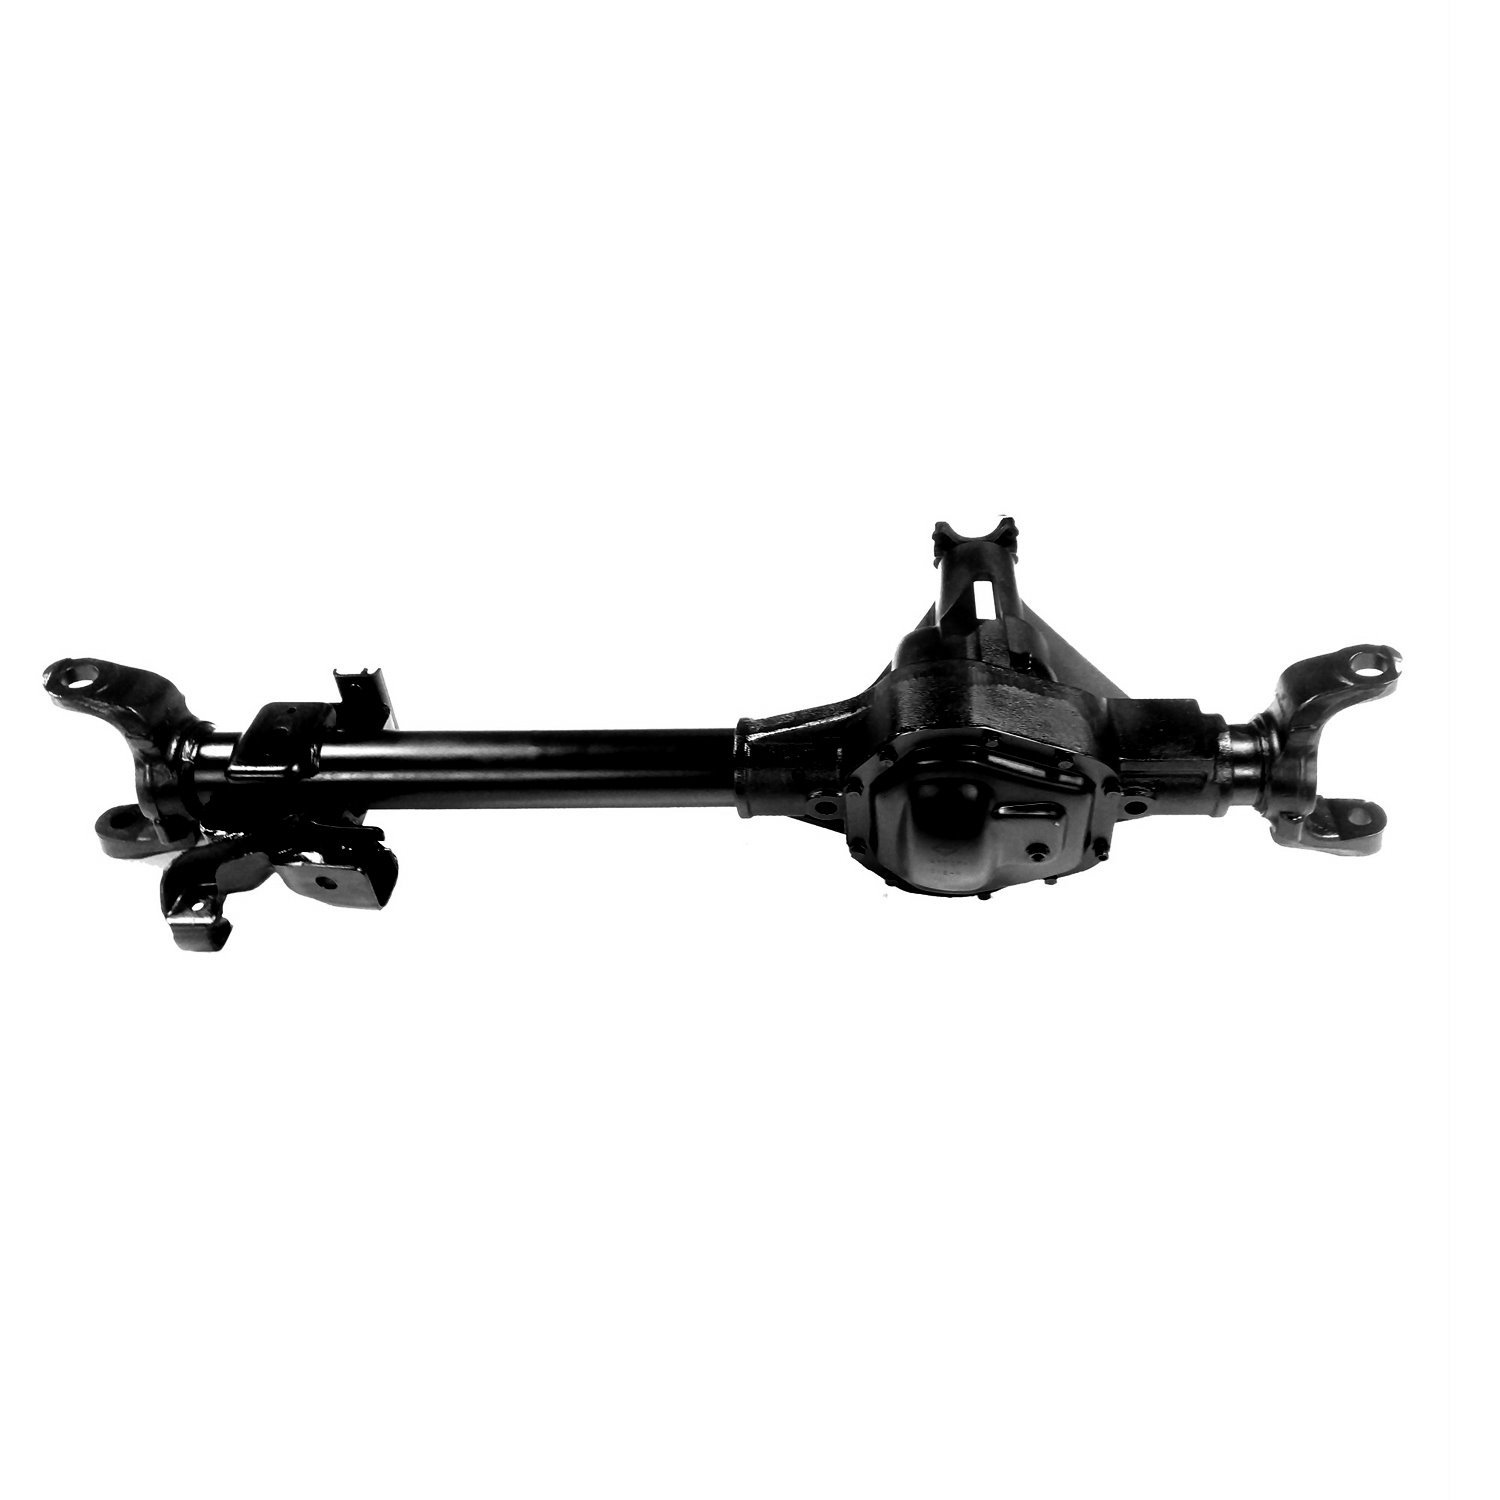 Remanufactured Complete Axle Assembly for Dana 60 08-10 Ford F250 & F350 4.11 Ratio, SRW